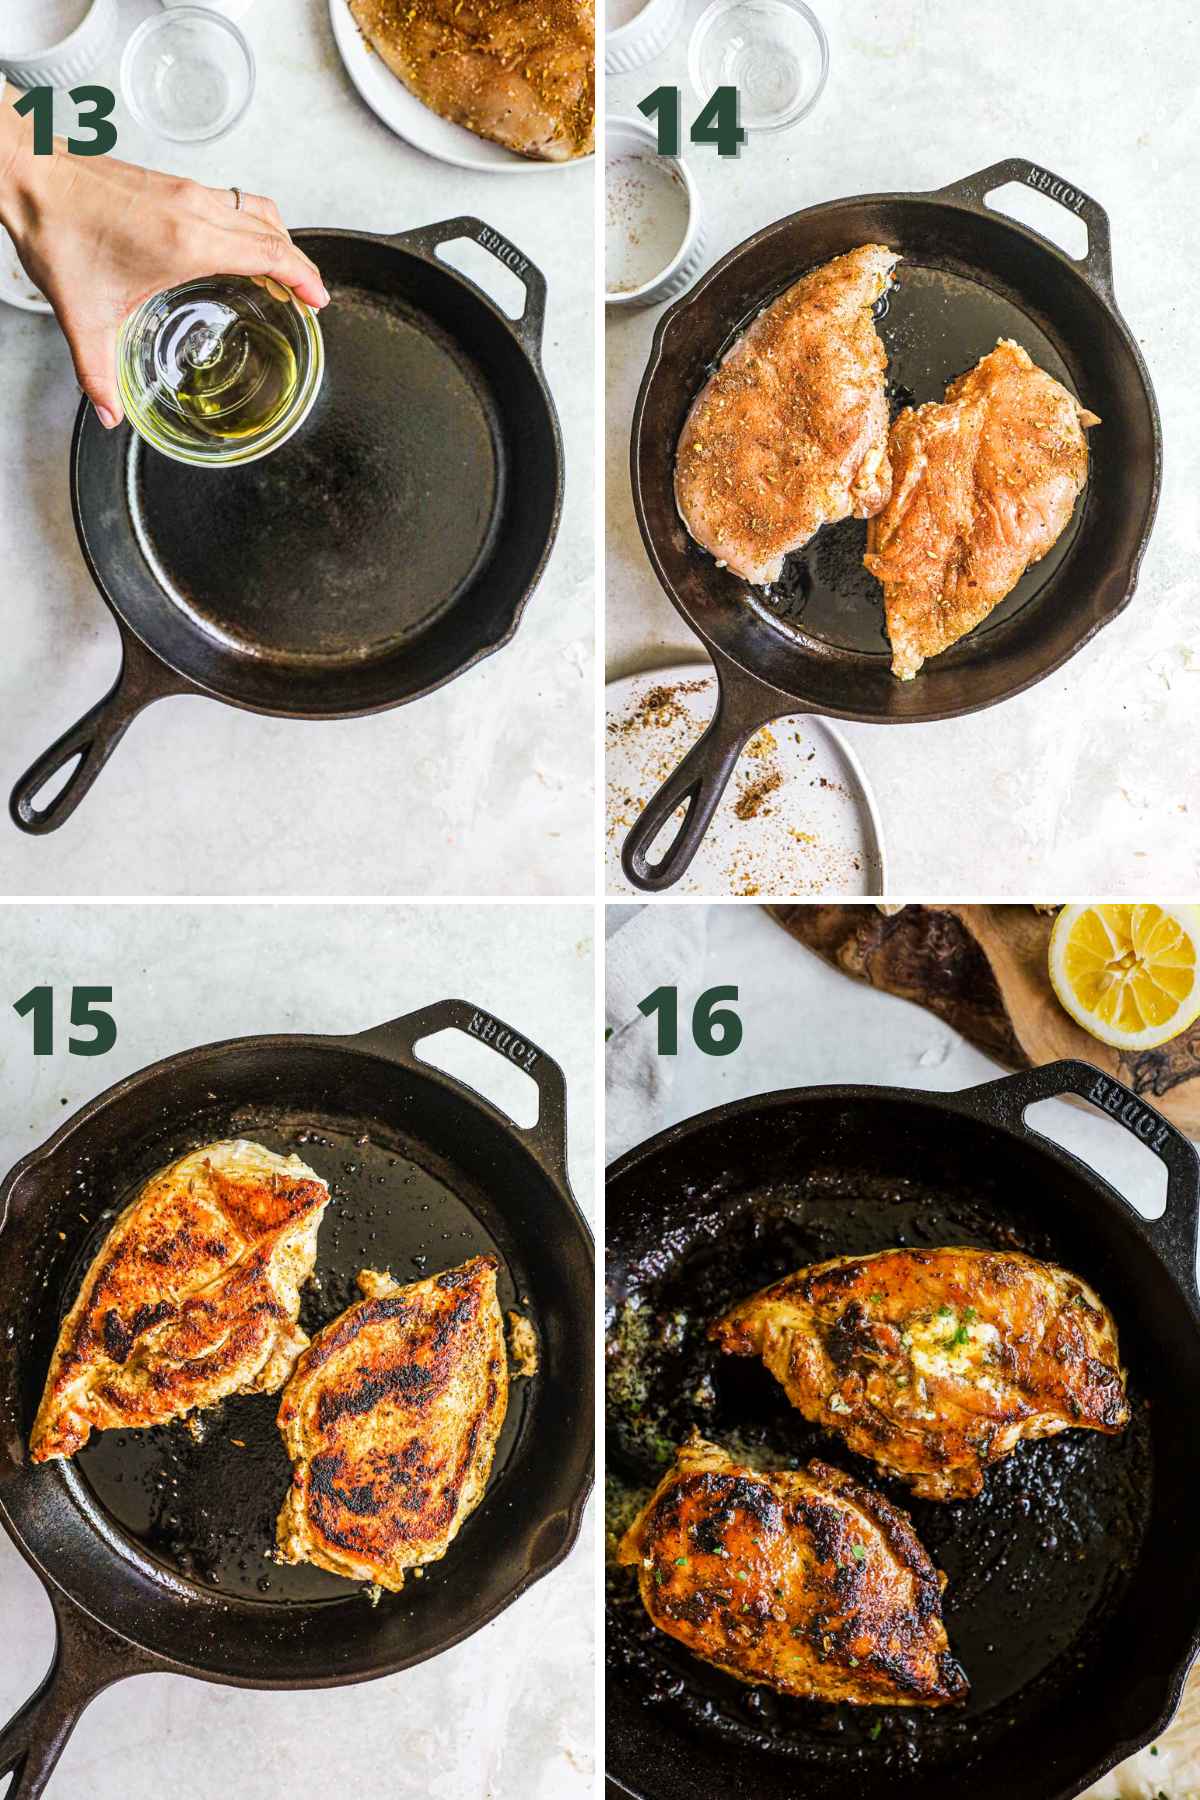 Steps to make cast iron skillet chicken, add oil to skillet, sear on one side, flip, bake in oven, top with roasted garlic butter and lemon juice.